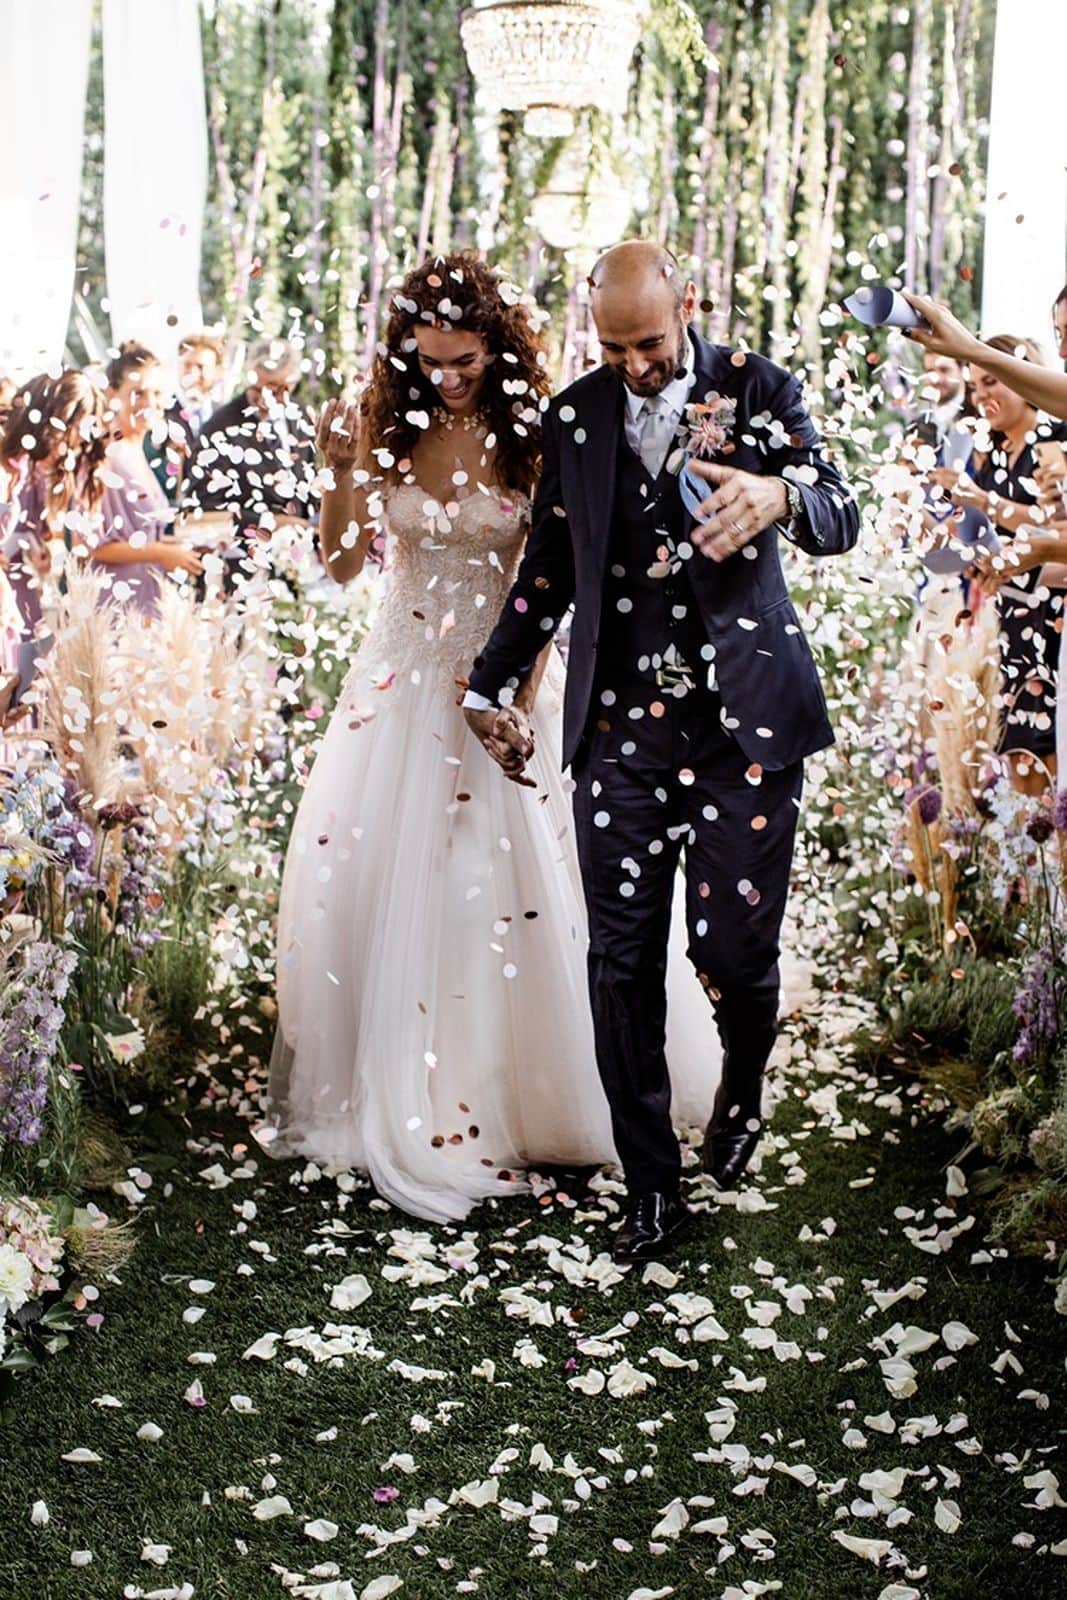 Bride and groom walk down Italian garden wedding ceremony aisle while guests toss confetti